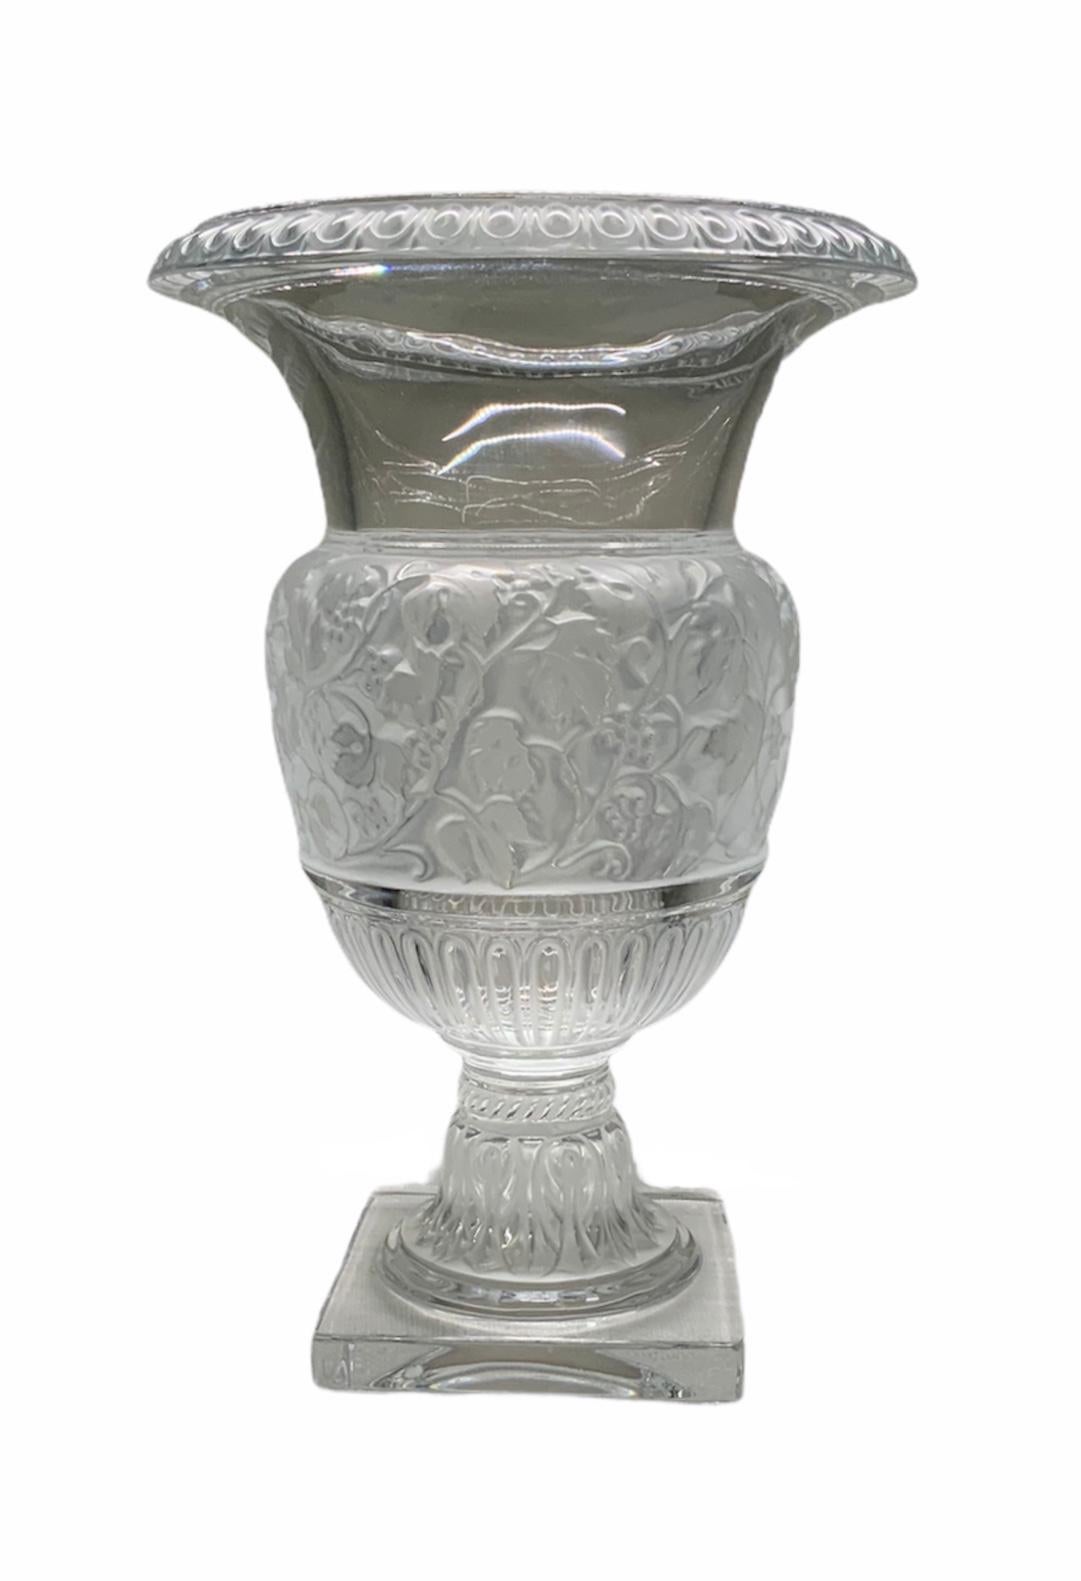 This a large clear Lalique crystal urn vase adorned with a continuous carved flowers branches. The vase has a bulbous body and a bell shaped rim. It is signed Lalique in the border of the square base.